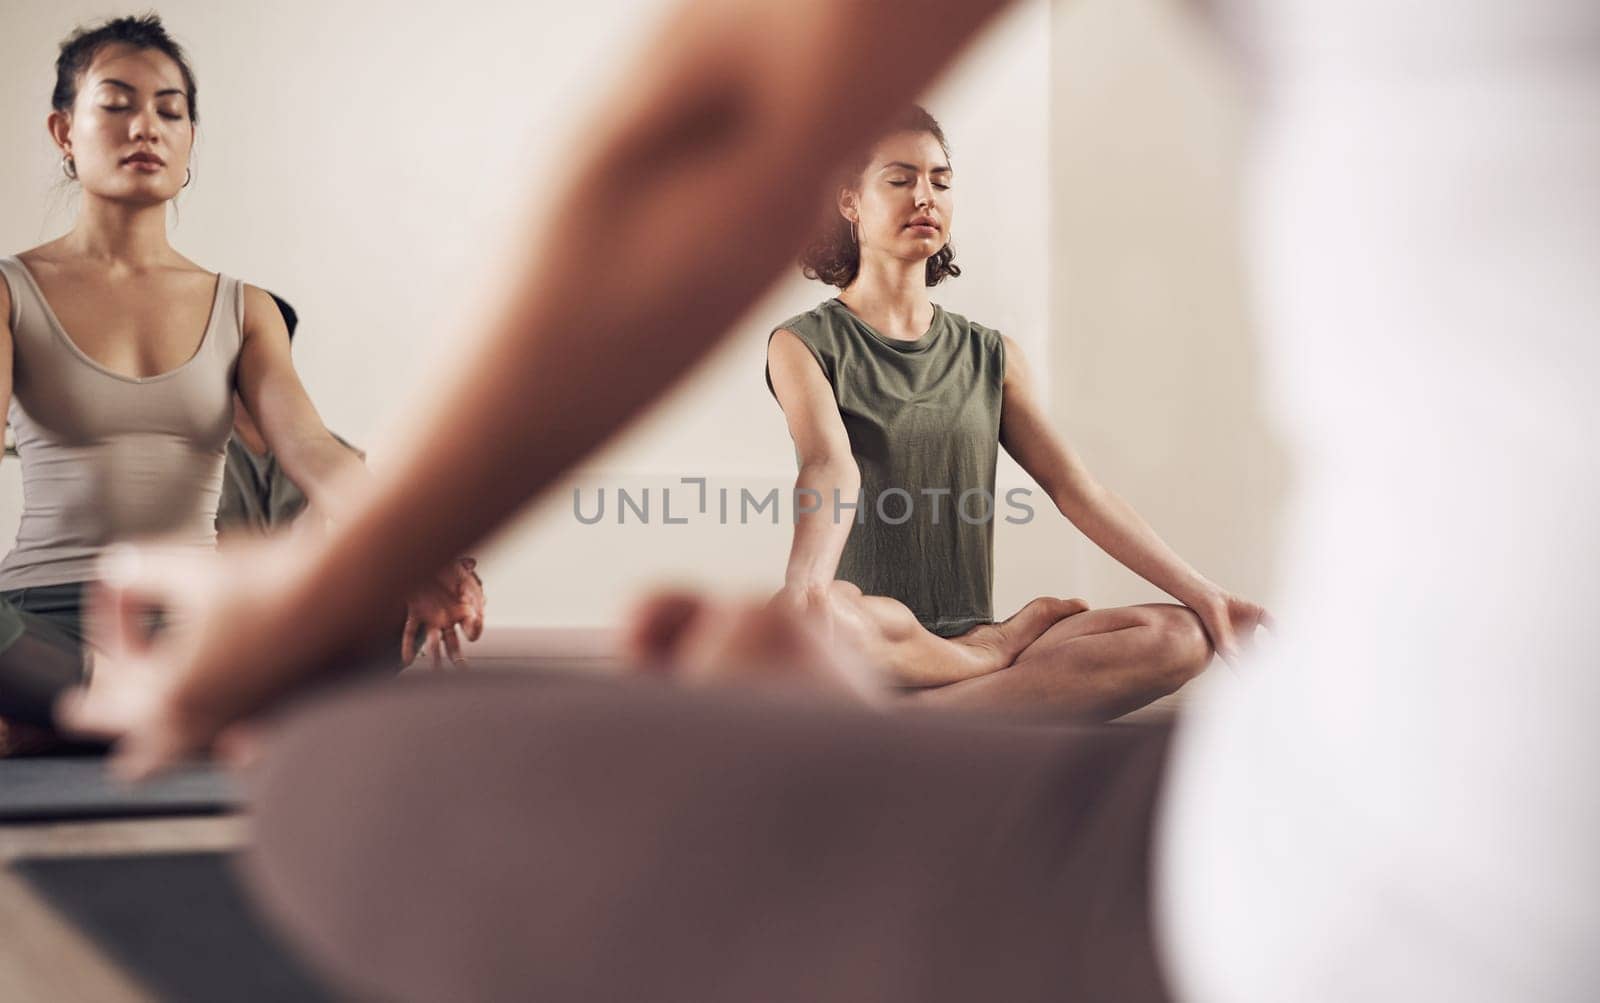 Yoga, meditation teacher and group in a wellness and health class to relax with zen and peace. Female people, spiritual and holistic exercise with calm lotus pose with pilates and woman in gym.